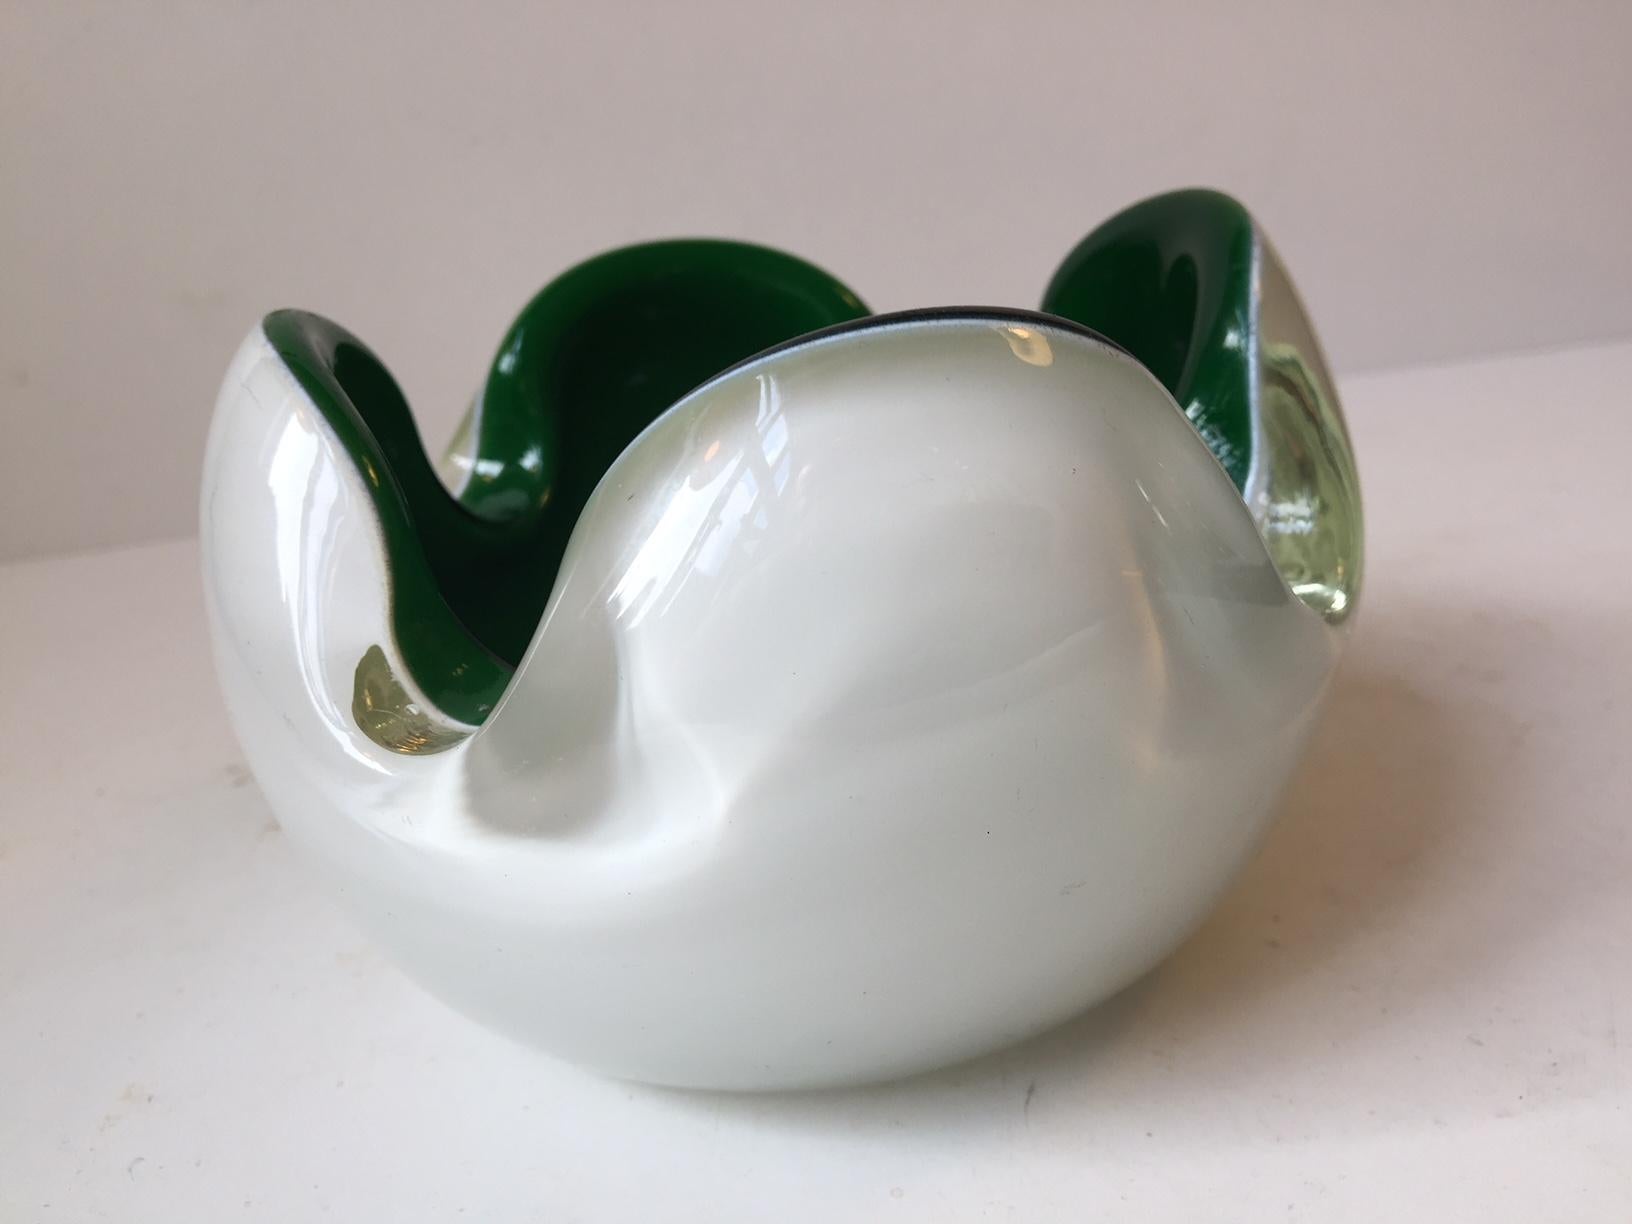 Italian Collapsed Bowl or Cigar Ashtray from Murano, 1960s